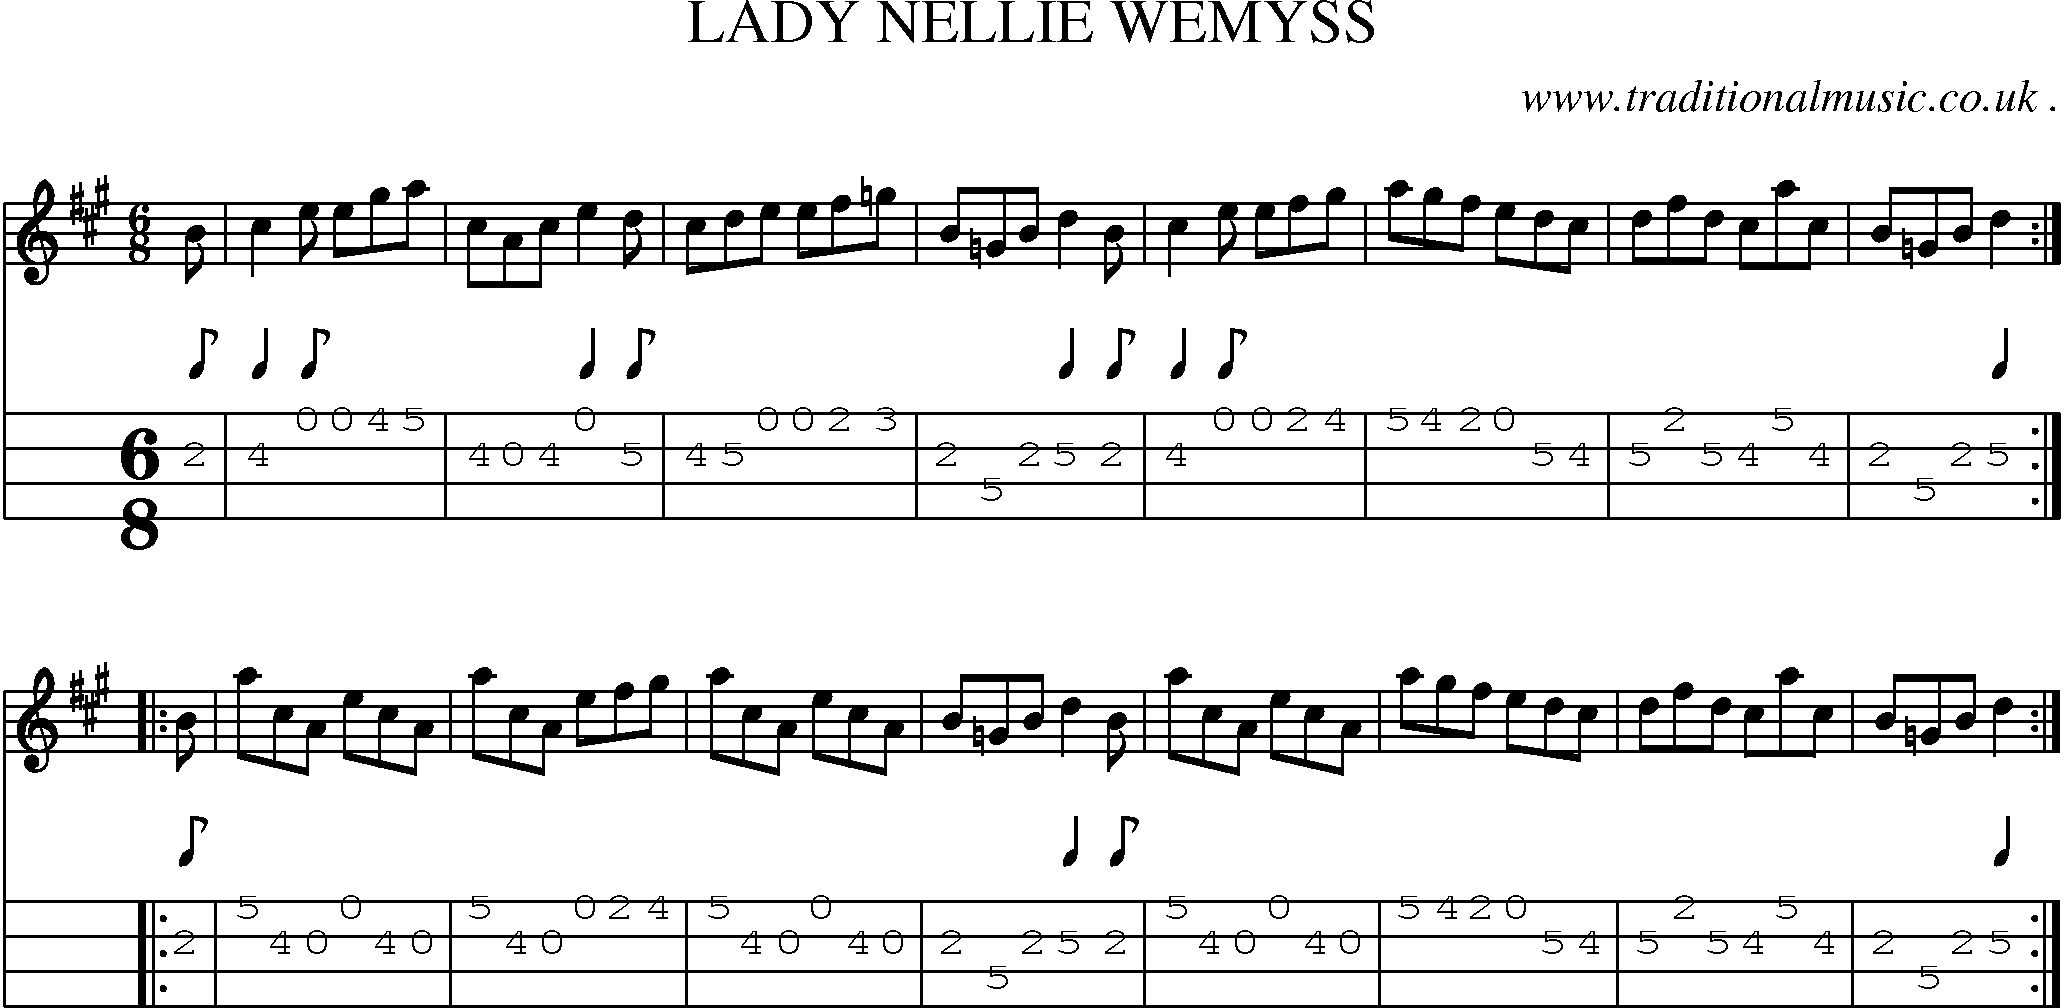 Sheet-music  score, Chords and Mandolin Tabs for Lady Nellie Wemyss